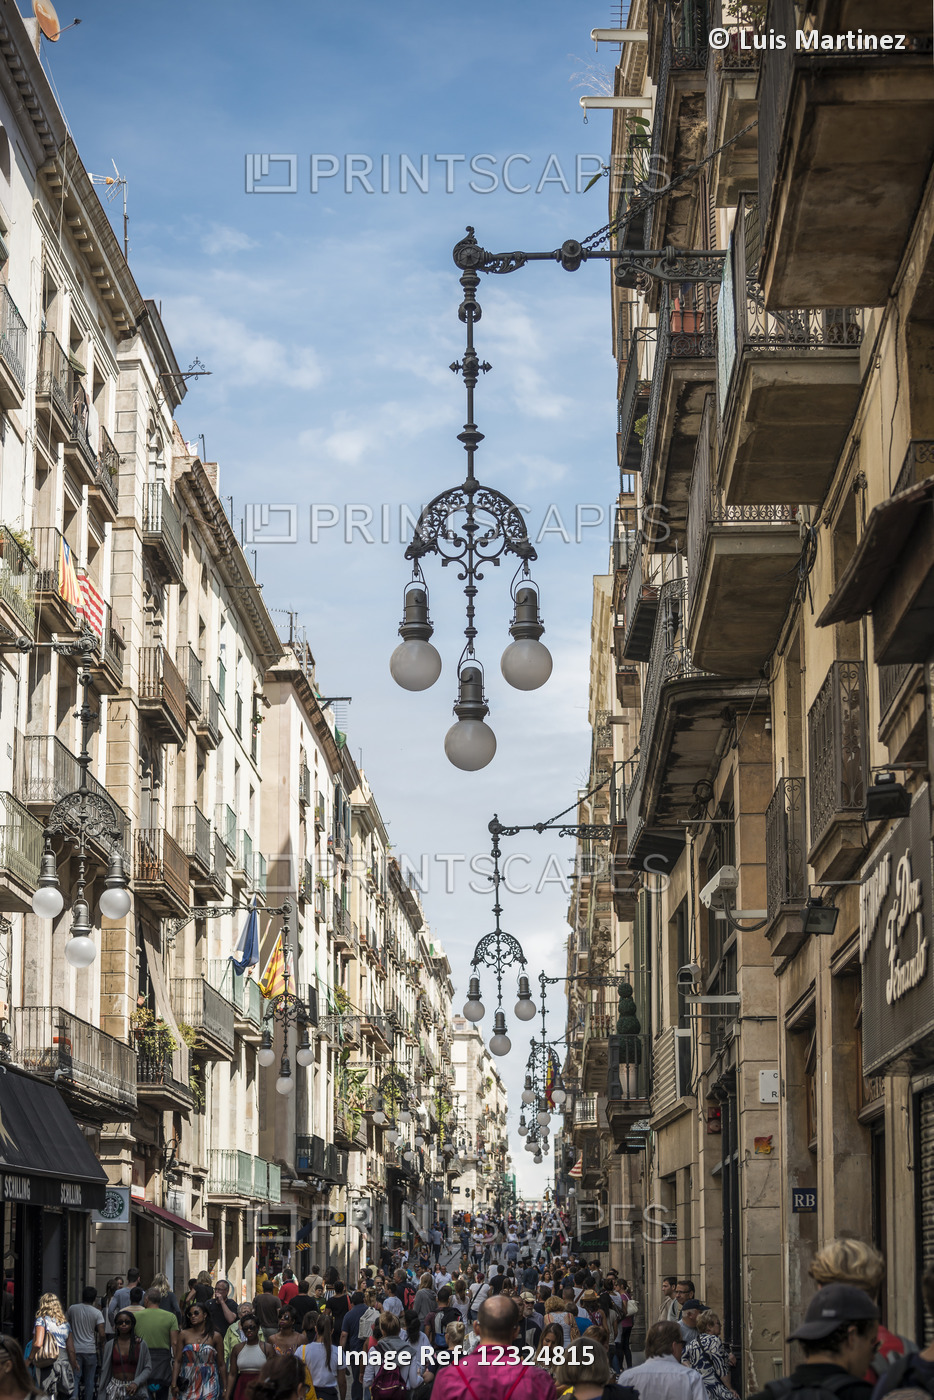 Barcelona's Downtown In Summer Is Always Crowded With Tourists; Barcelona, ...